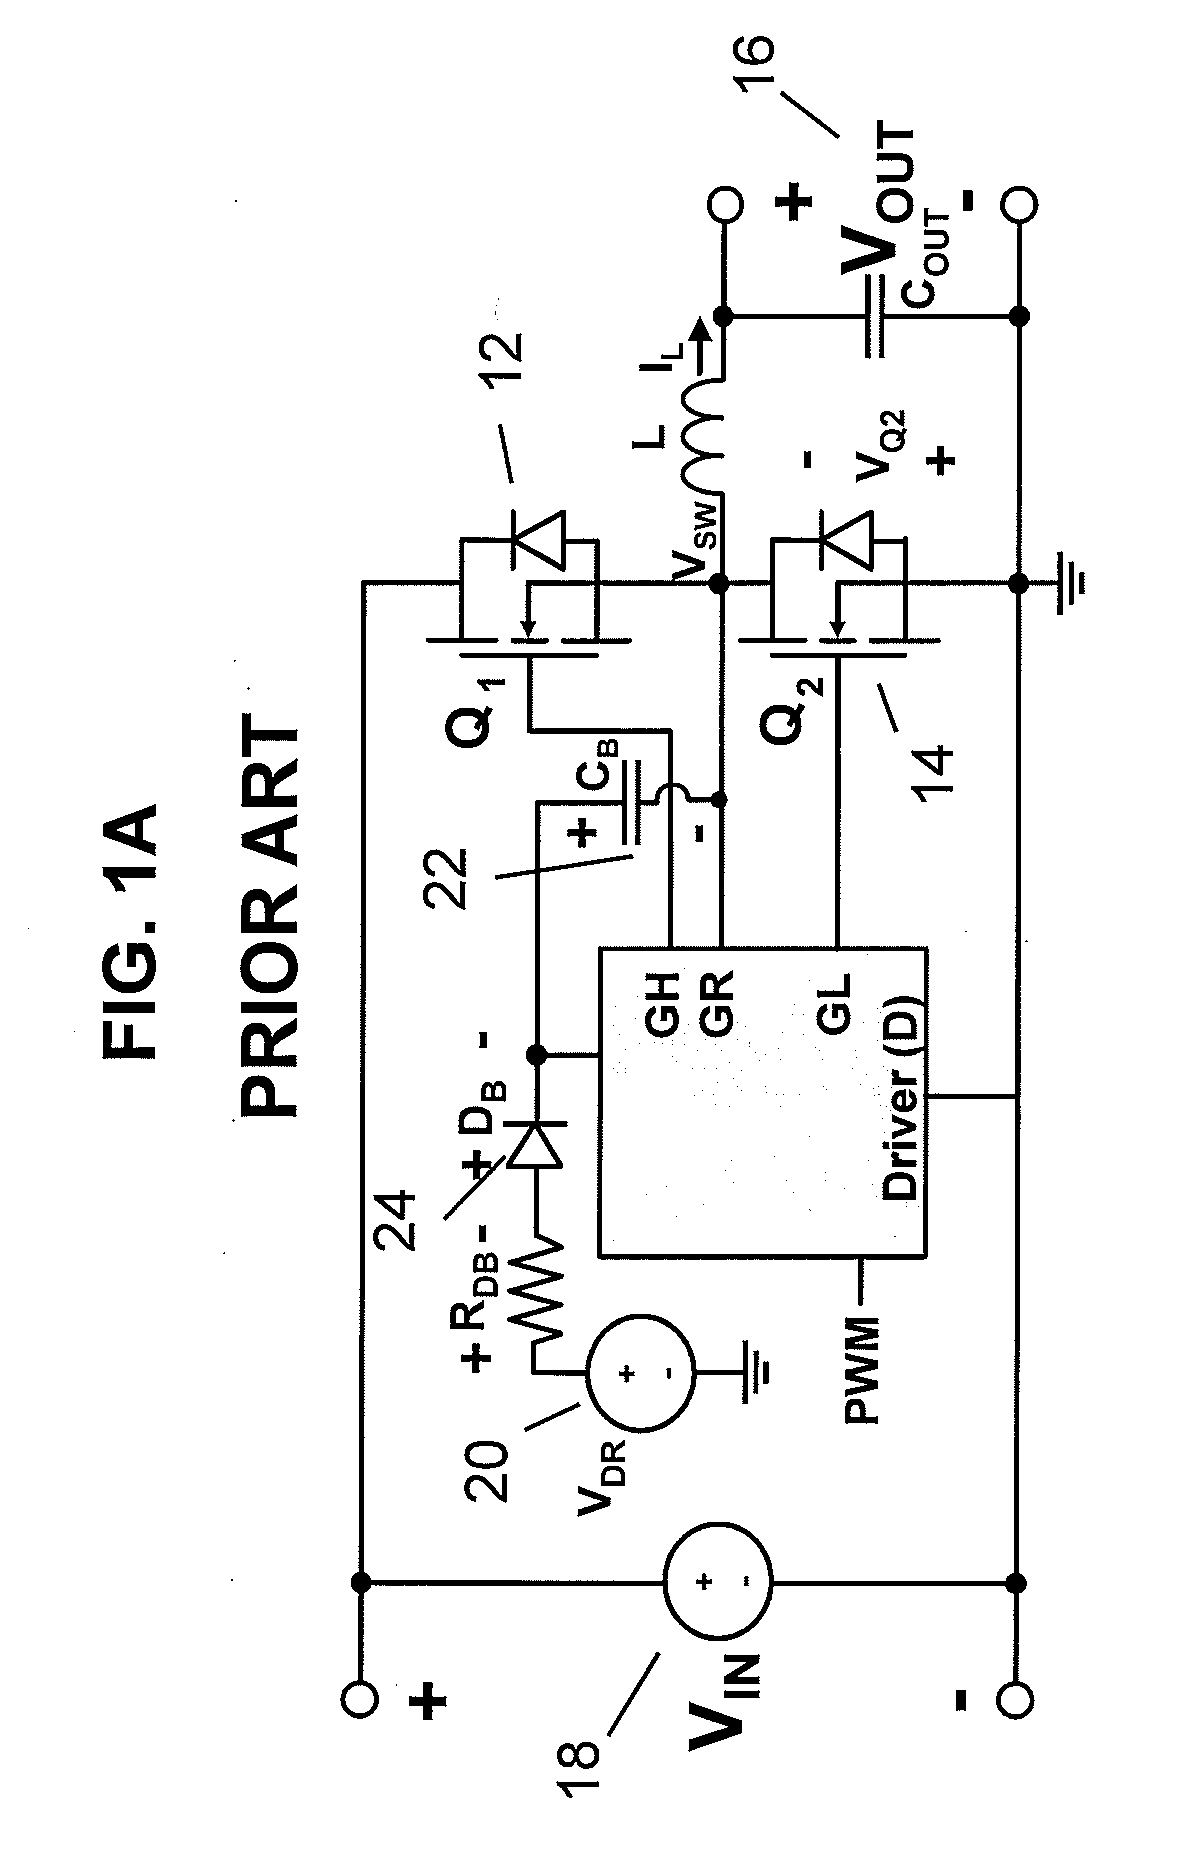 BOOTSTRAP CAPACITOR OVER-VOLTAGE MANAGEMENT CIRCUIT FOR GaN TRANSISTOR BASED POWER CONVERTERS